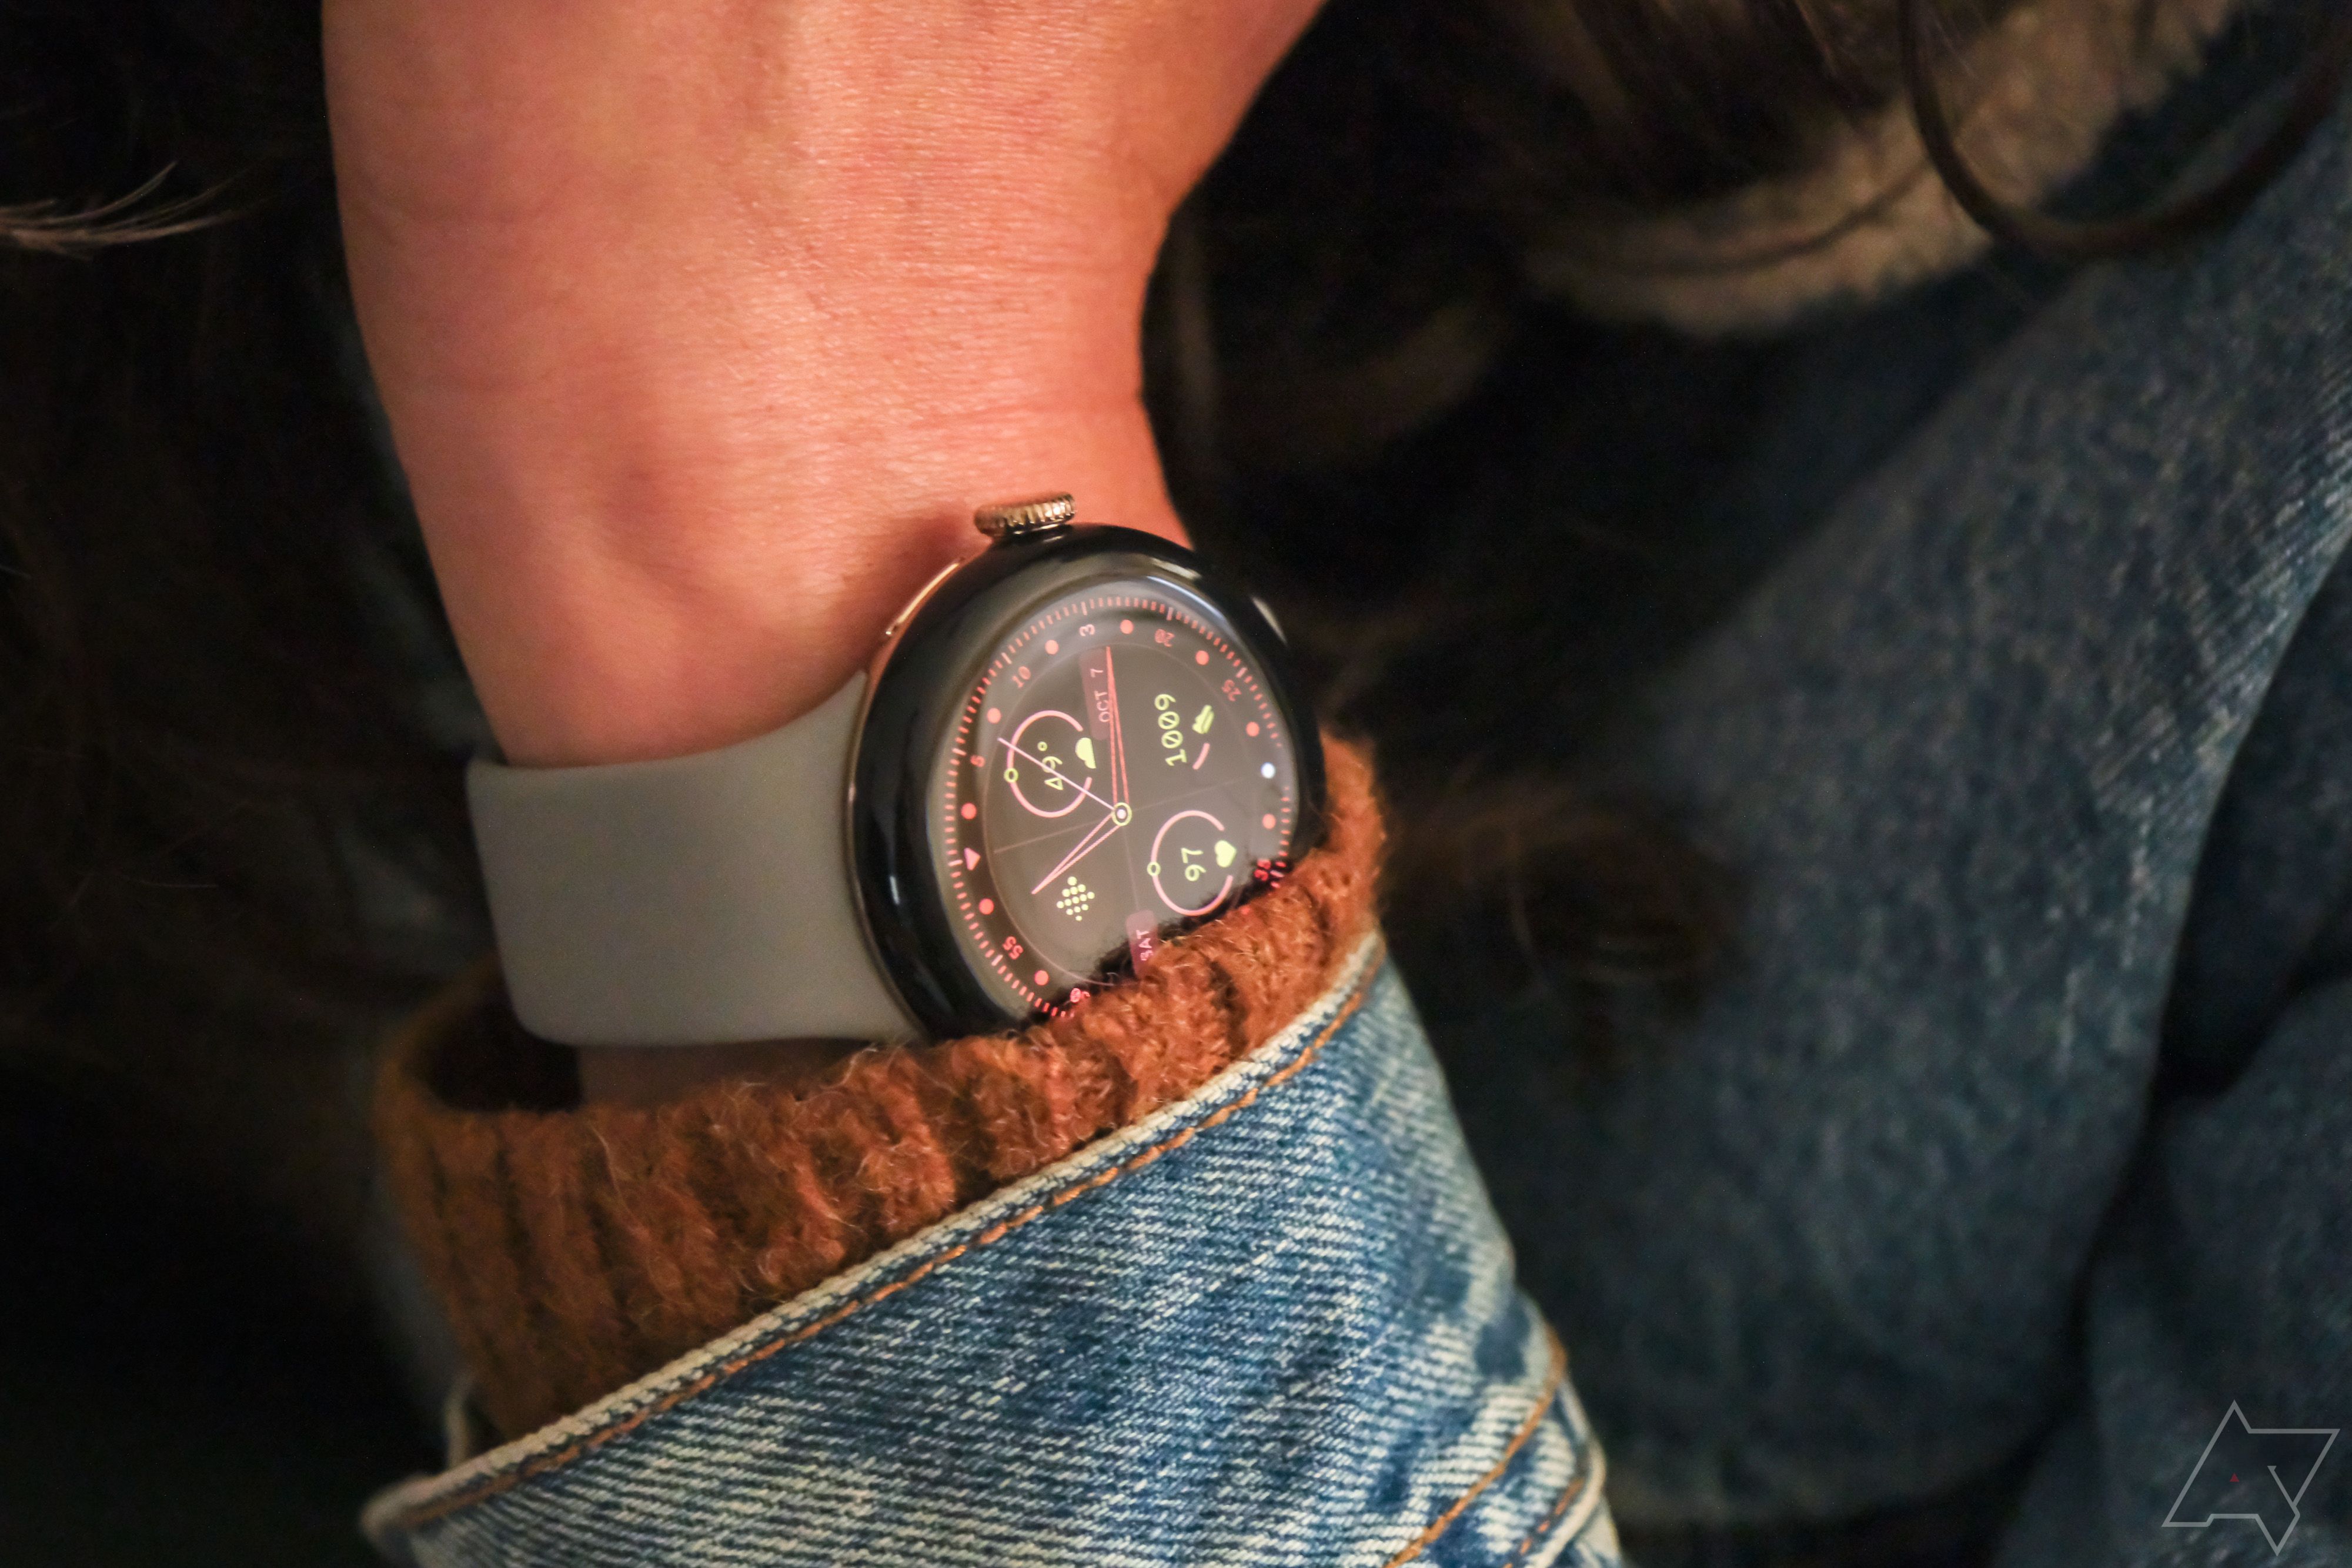 A person wears the Google Pixel Watch 2 with a denim jacket and wool sweater.